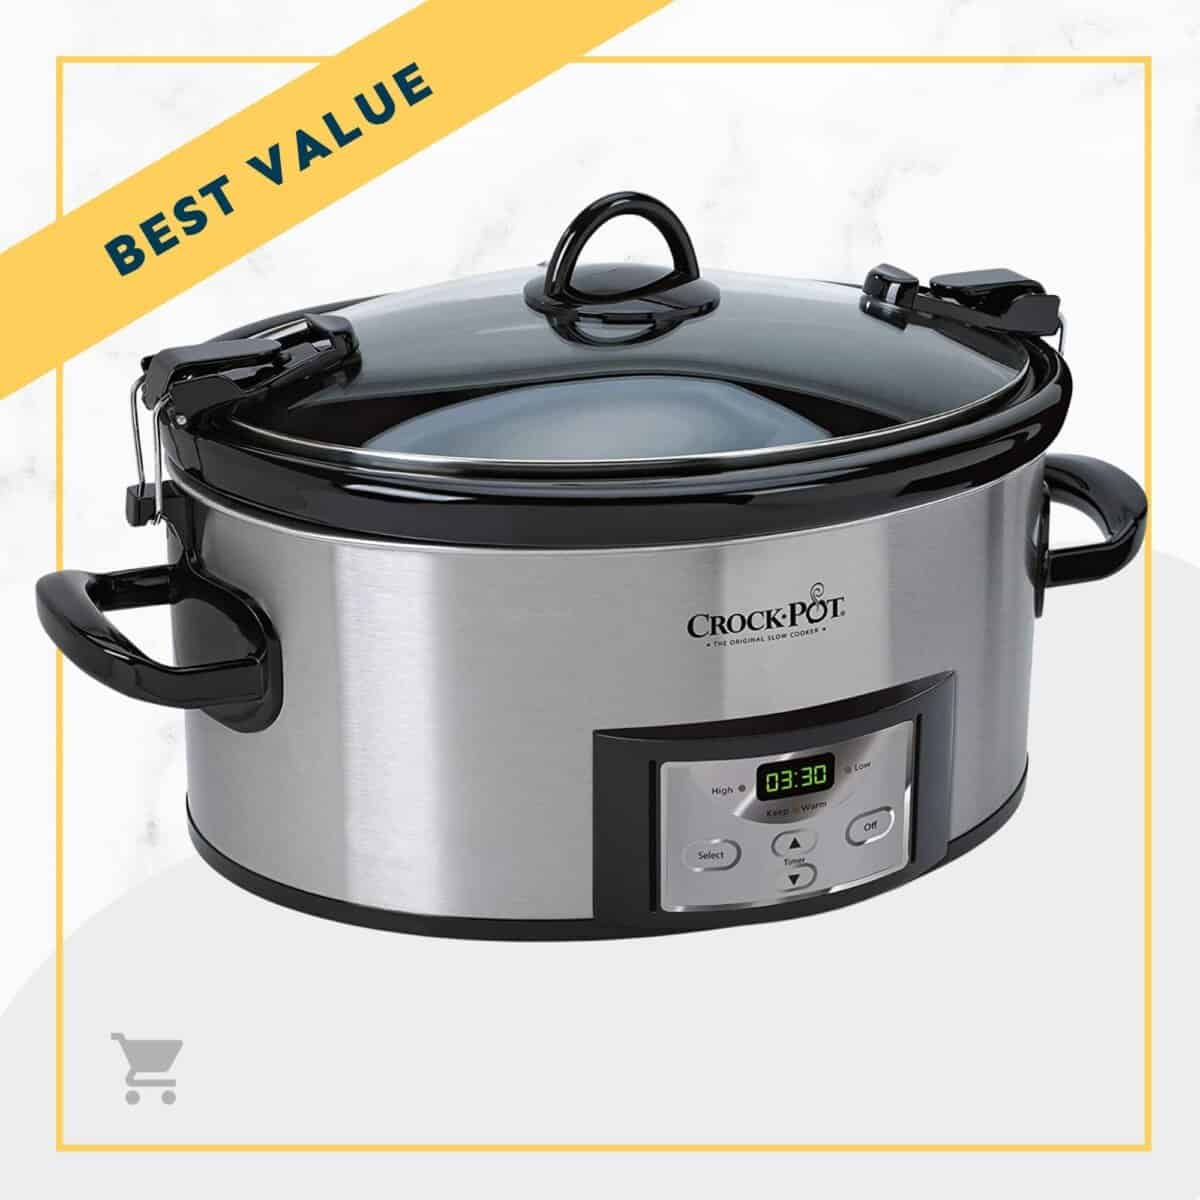 9 Best Slow Cookers for 2023 